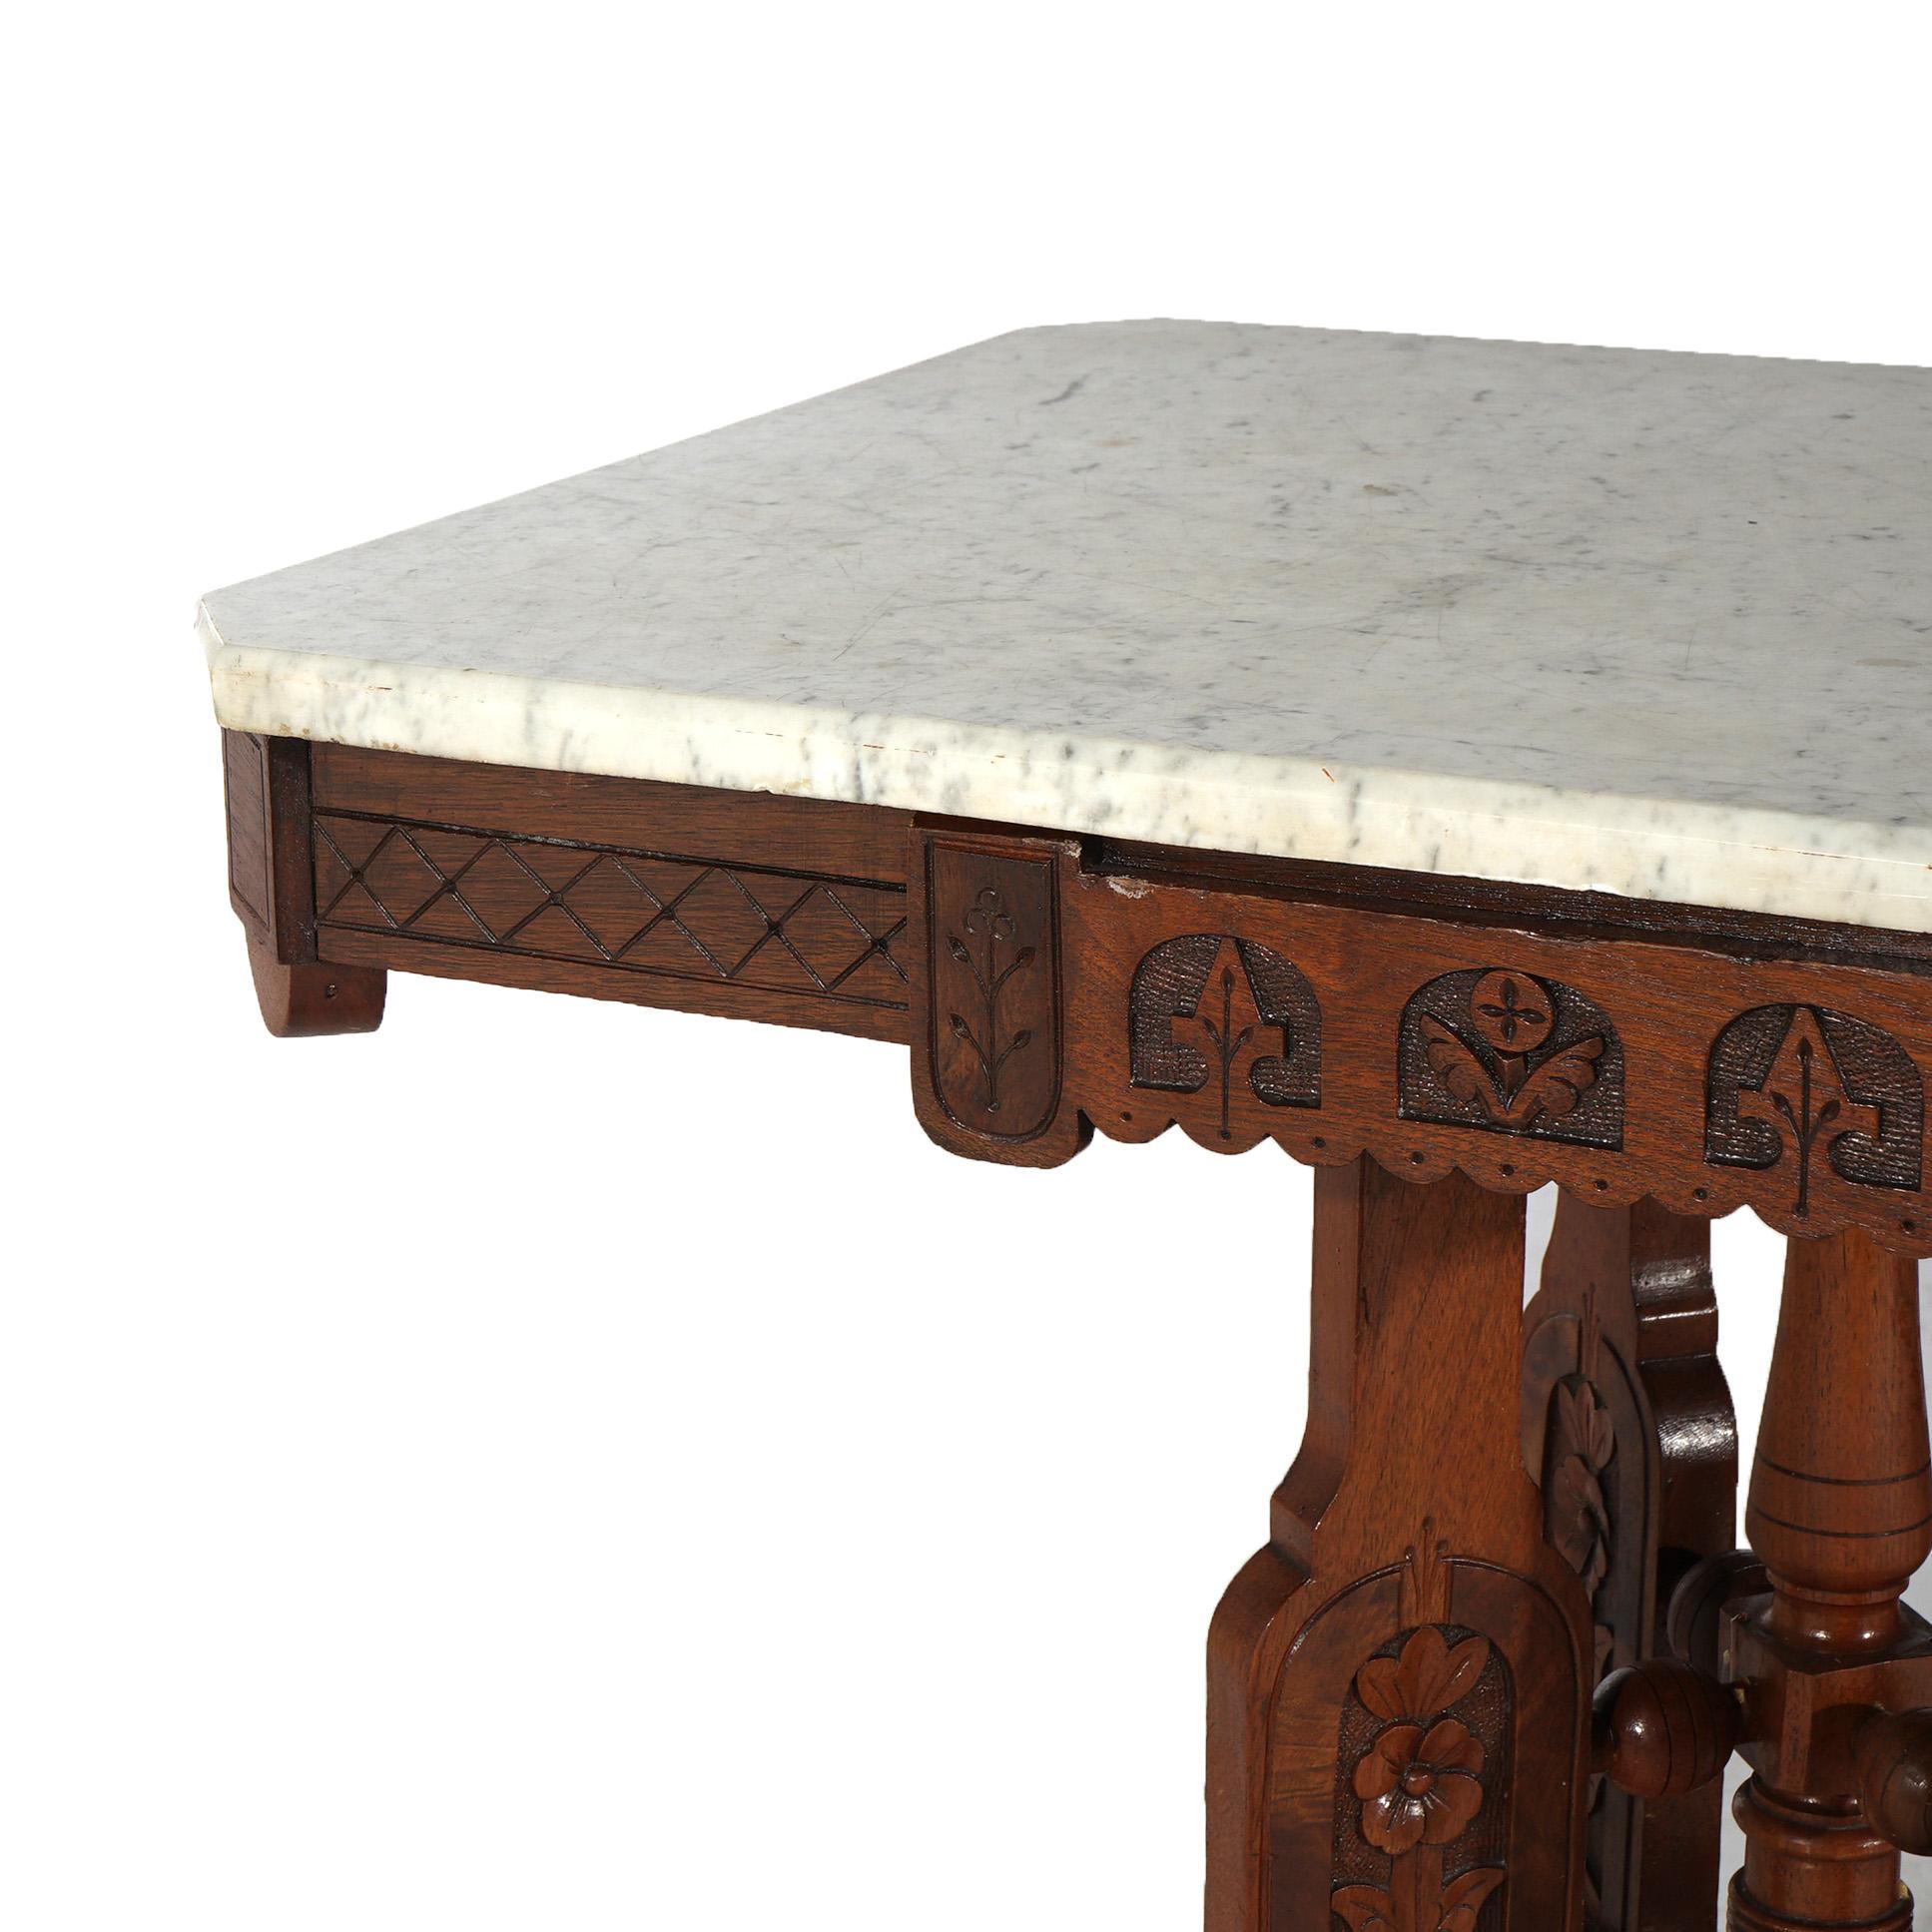 Antique Eastlake Aesthetic Floral Carved Walnut & Marble Parlor Table, c1880 For Sale 7